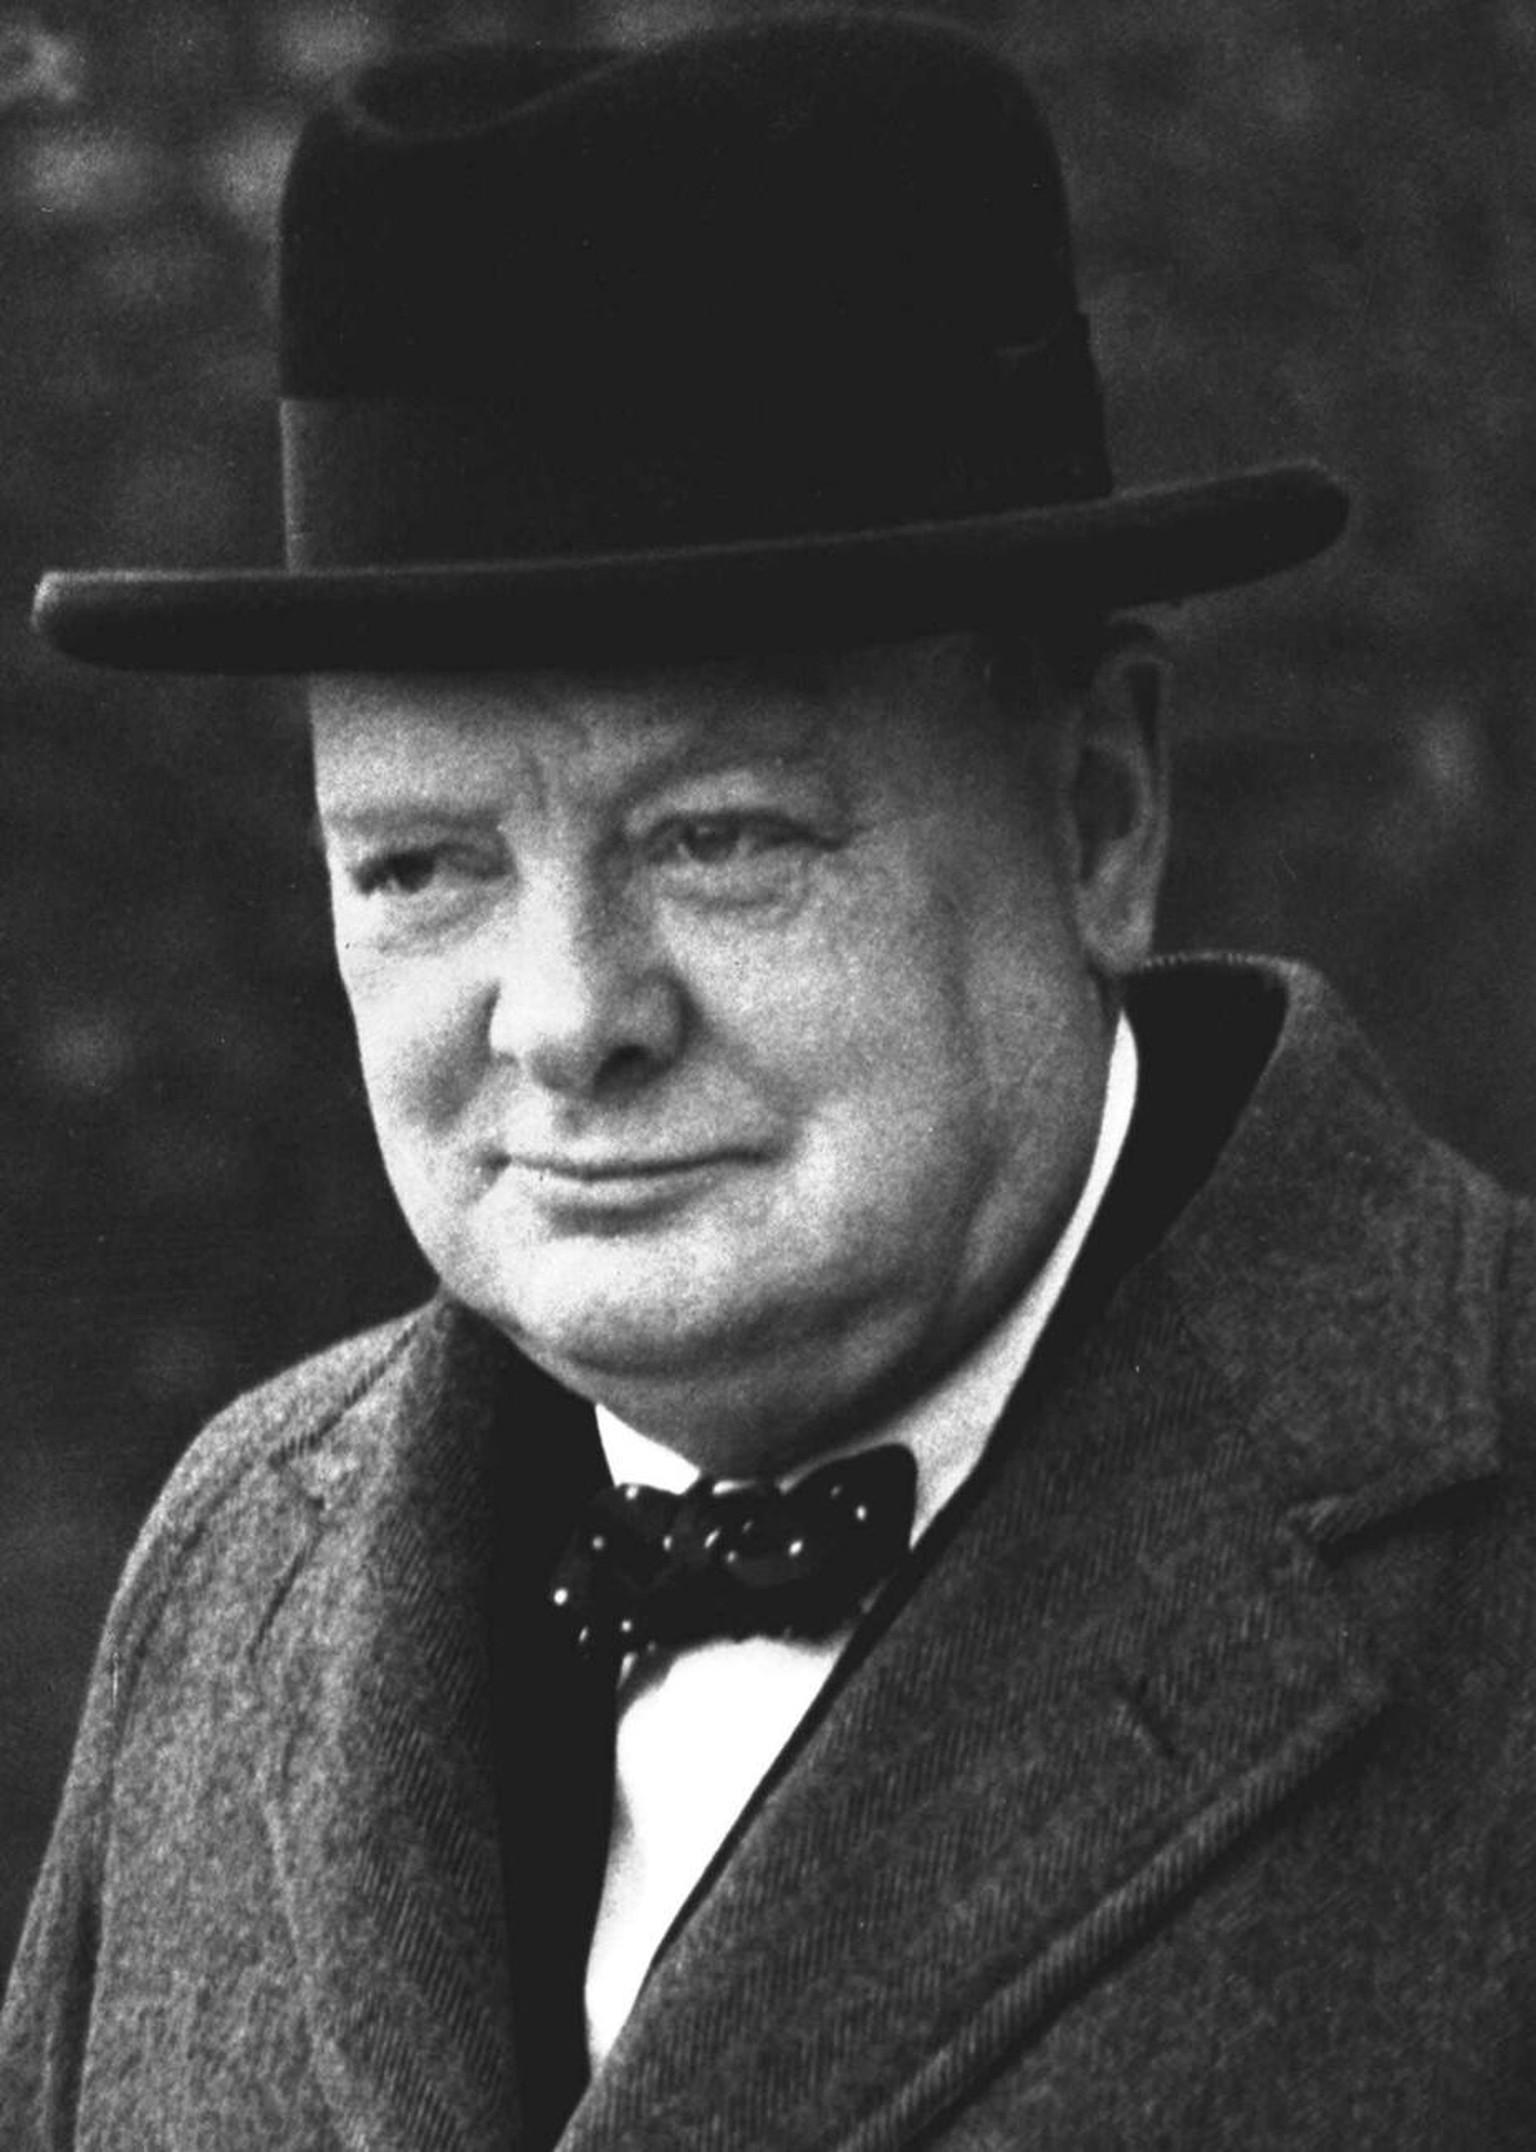 Winston Churchill is pictured in London, England, in this March 28, 1940, photo. Westminster College, located in Fulton, Mo., will renovate its Winston Churchill museum with all new exhibits to be com ...